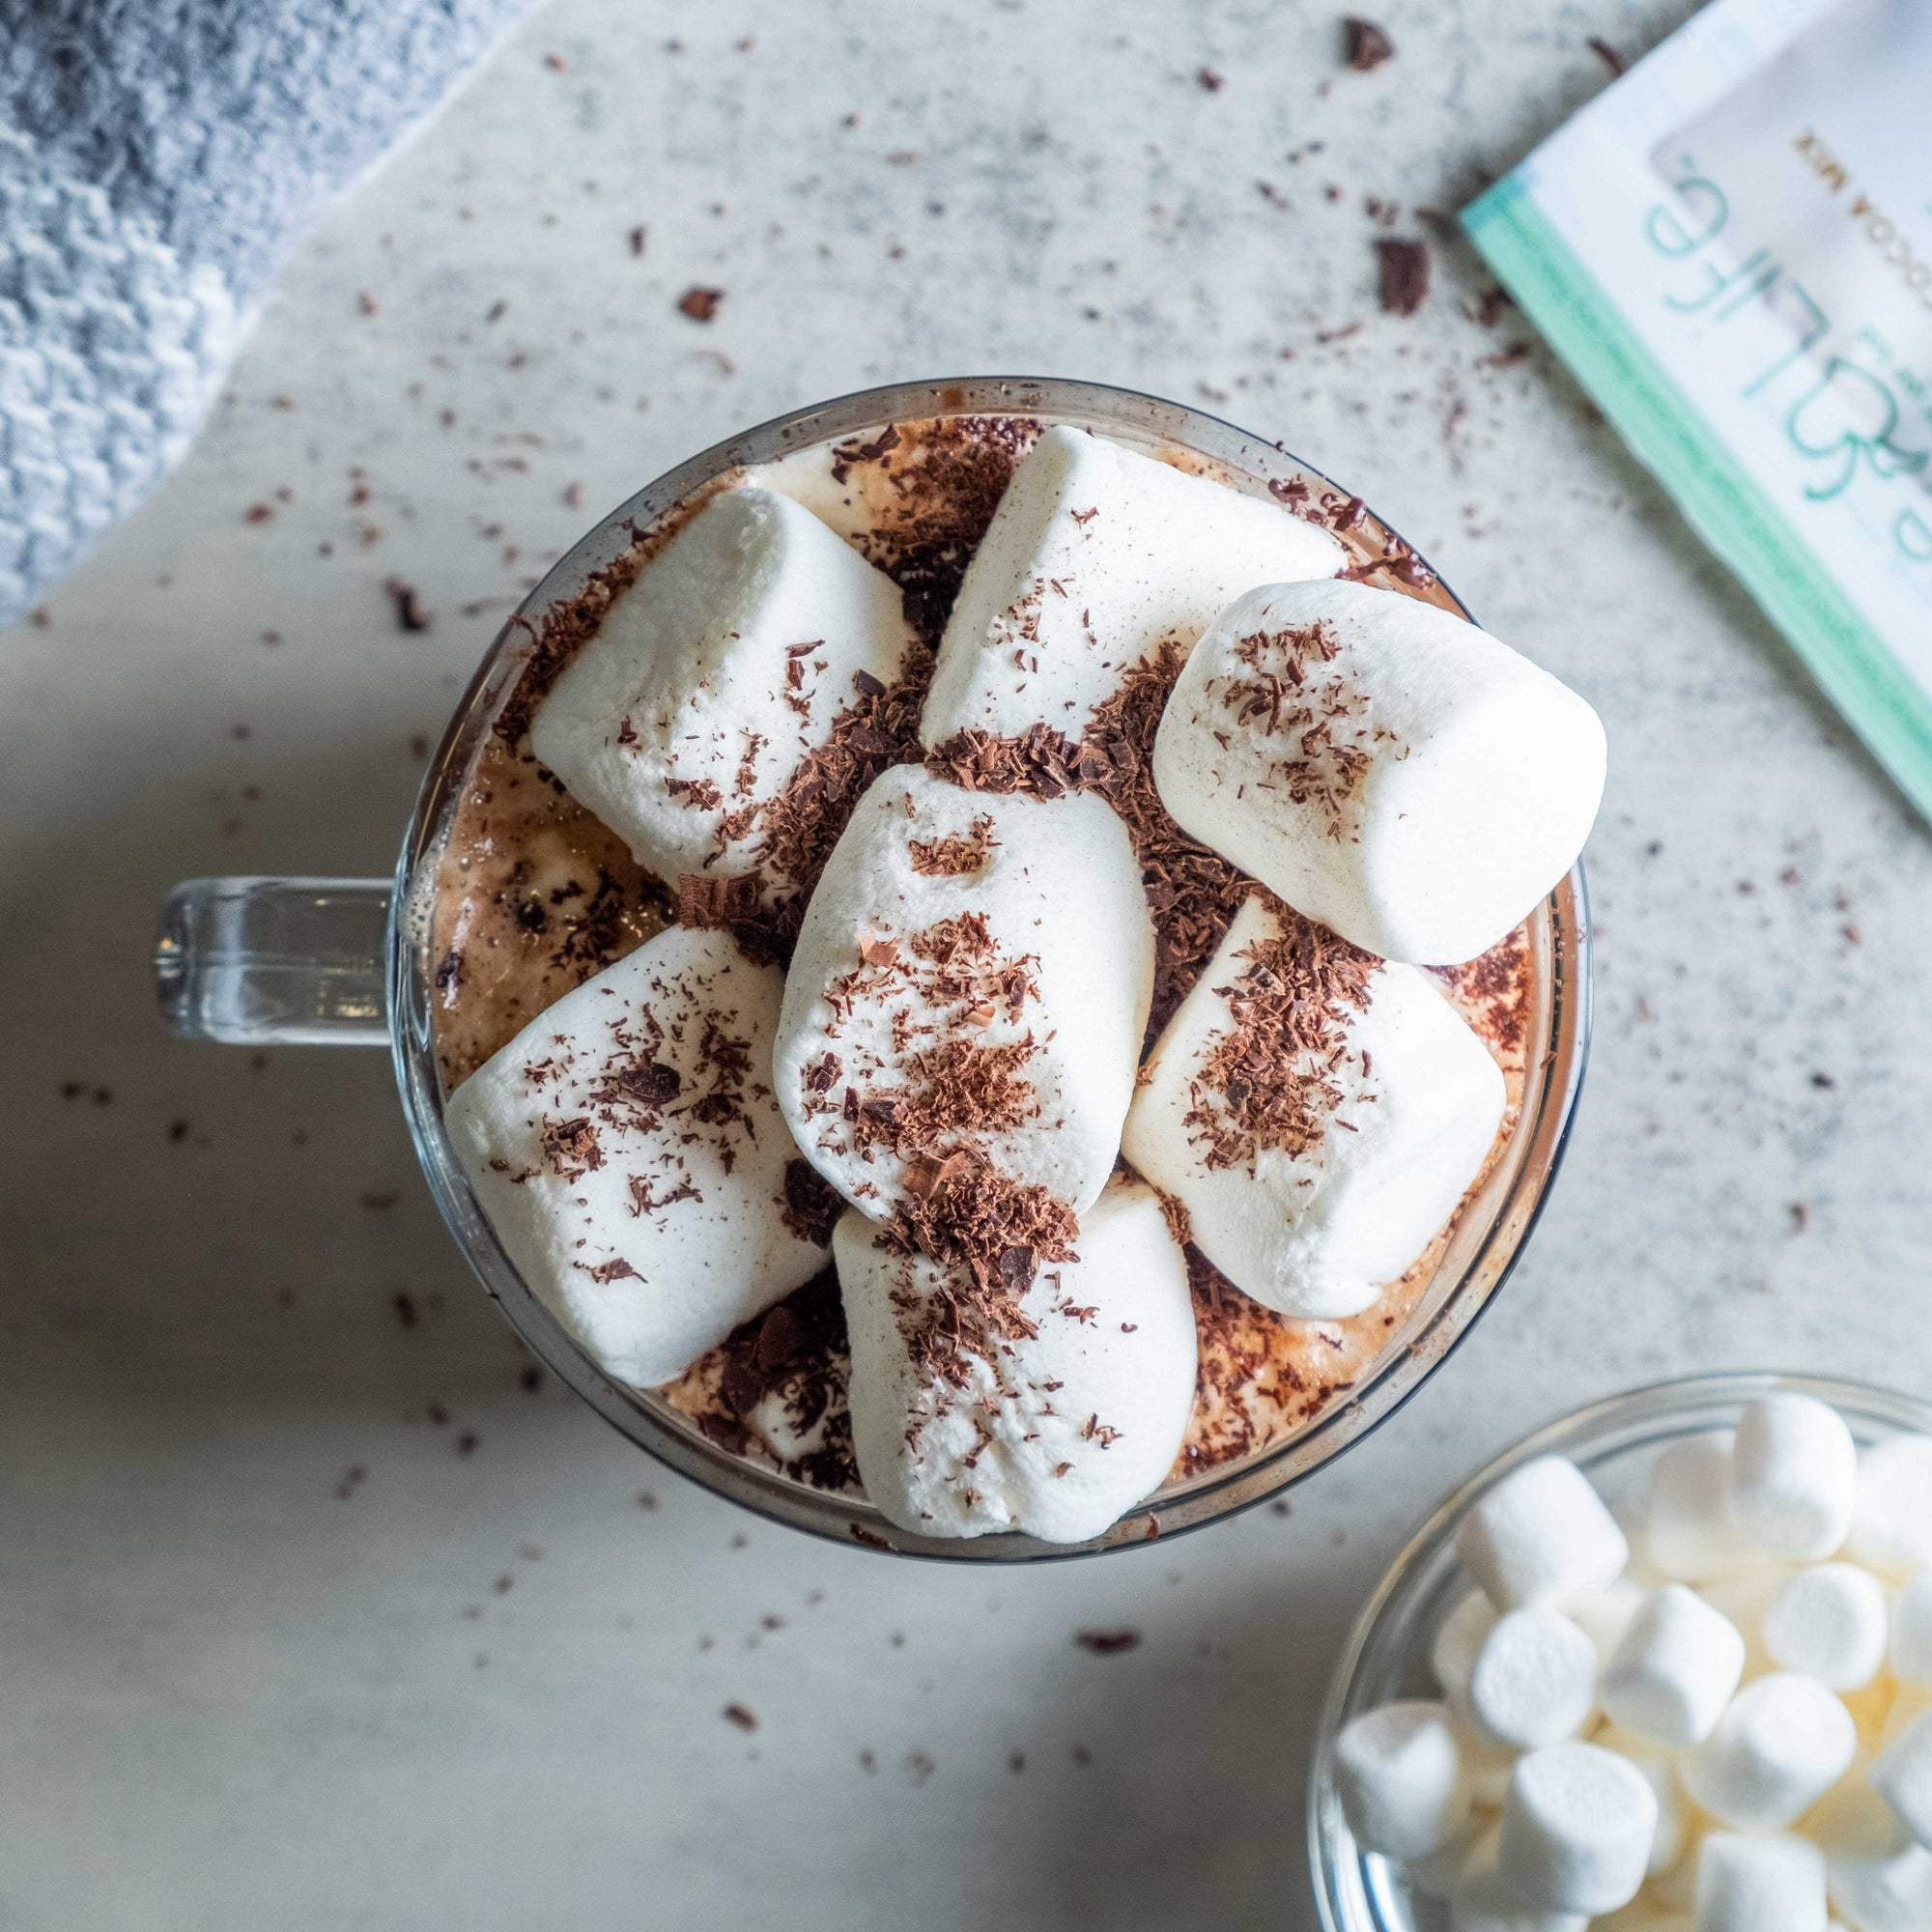 Bare Life Dairy Free Vegan Gluten Free Coconut Hot Cocoa in Topped with marshmallows